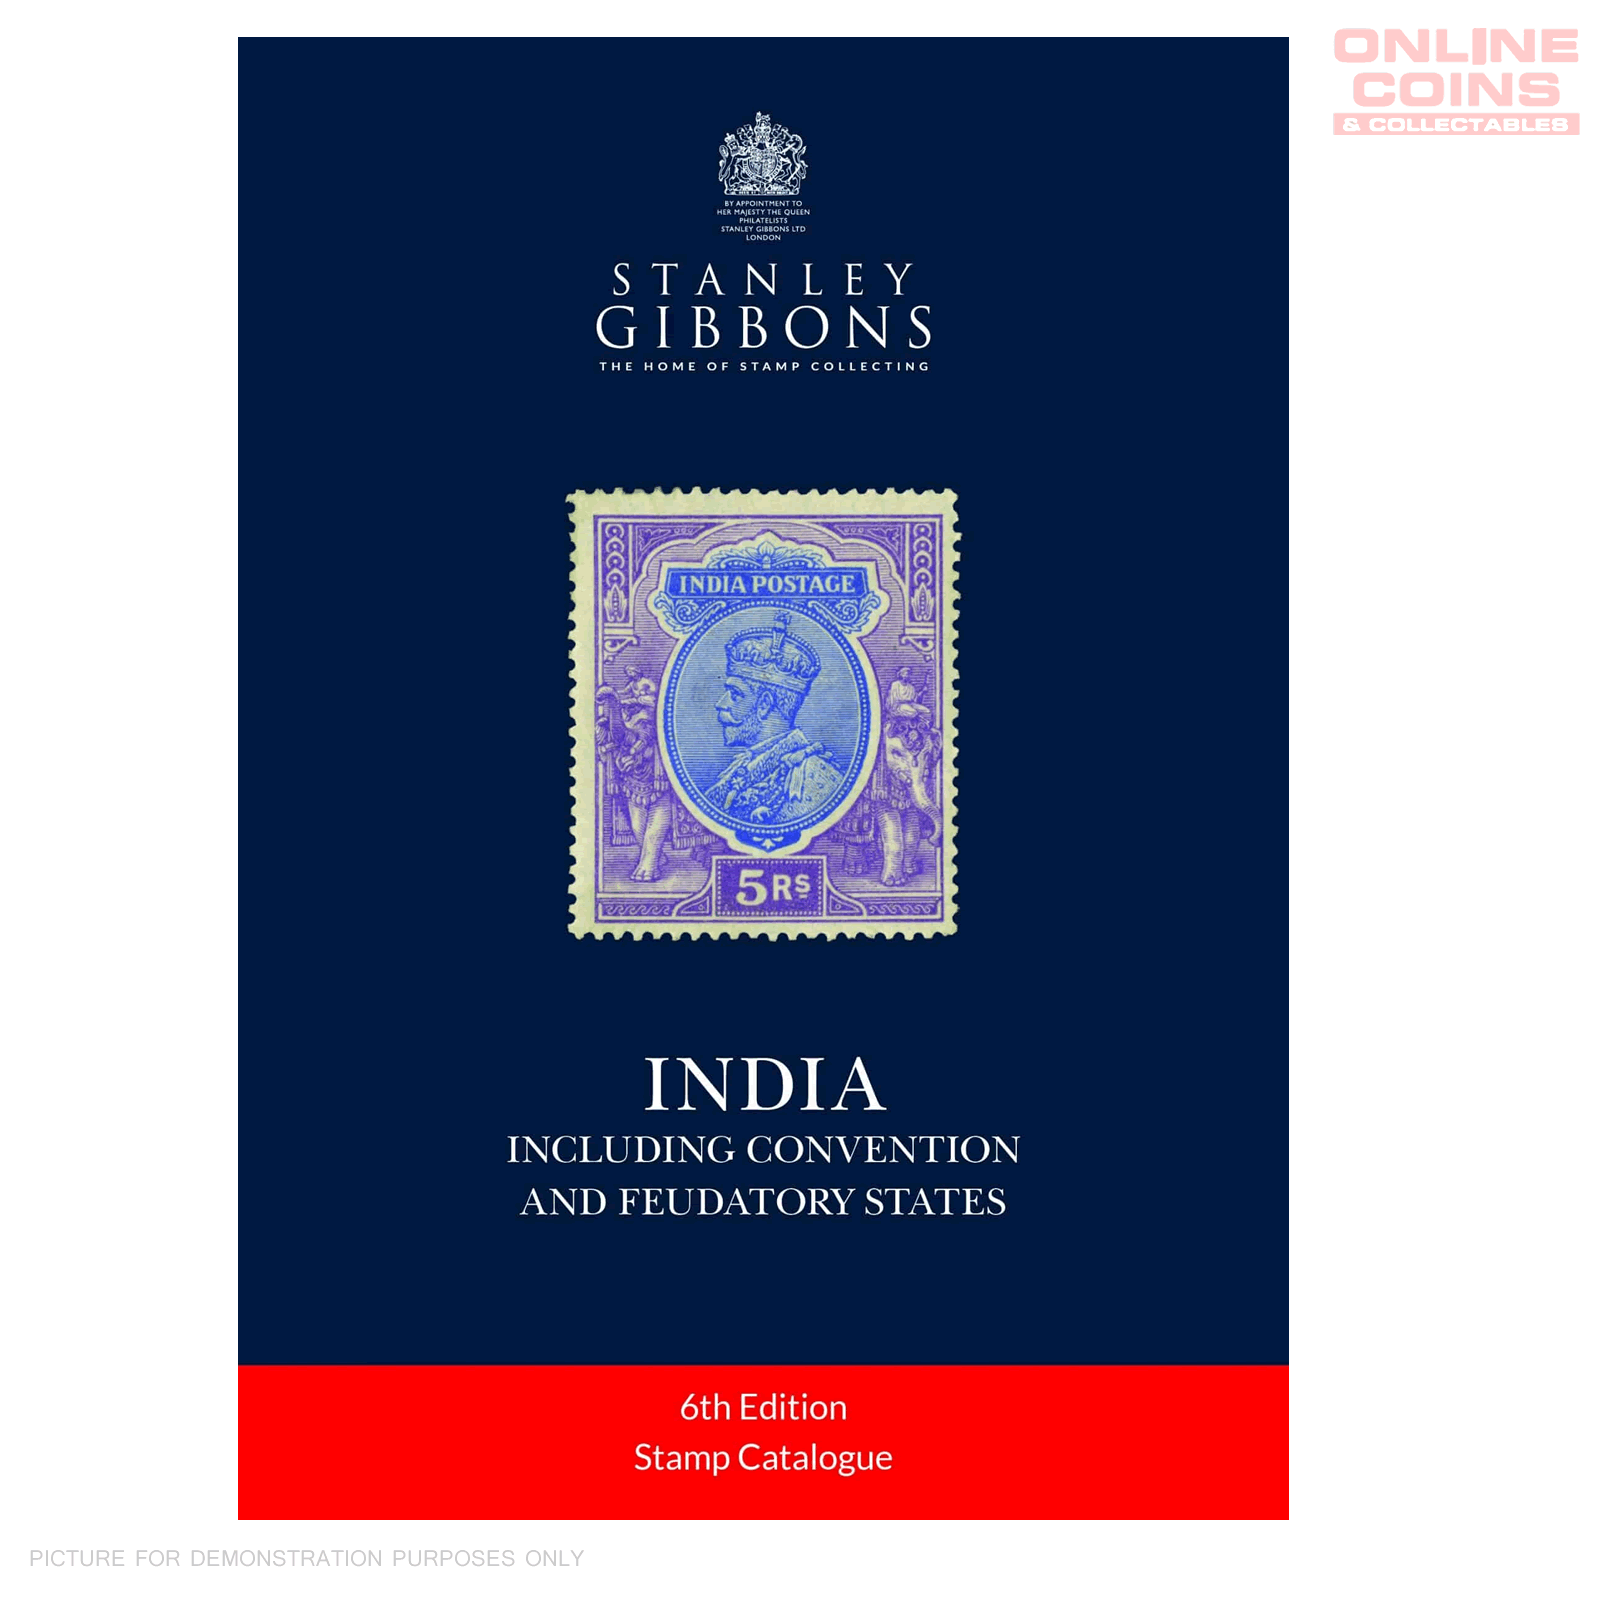 Stanley Gibbons India & Indian States Stamp Catalogue 6th Edition